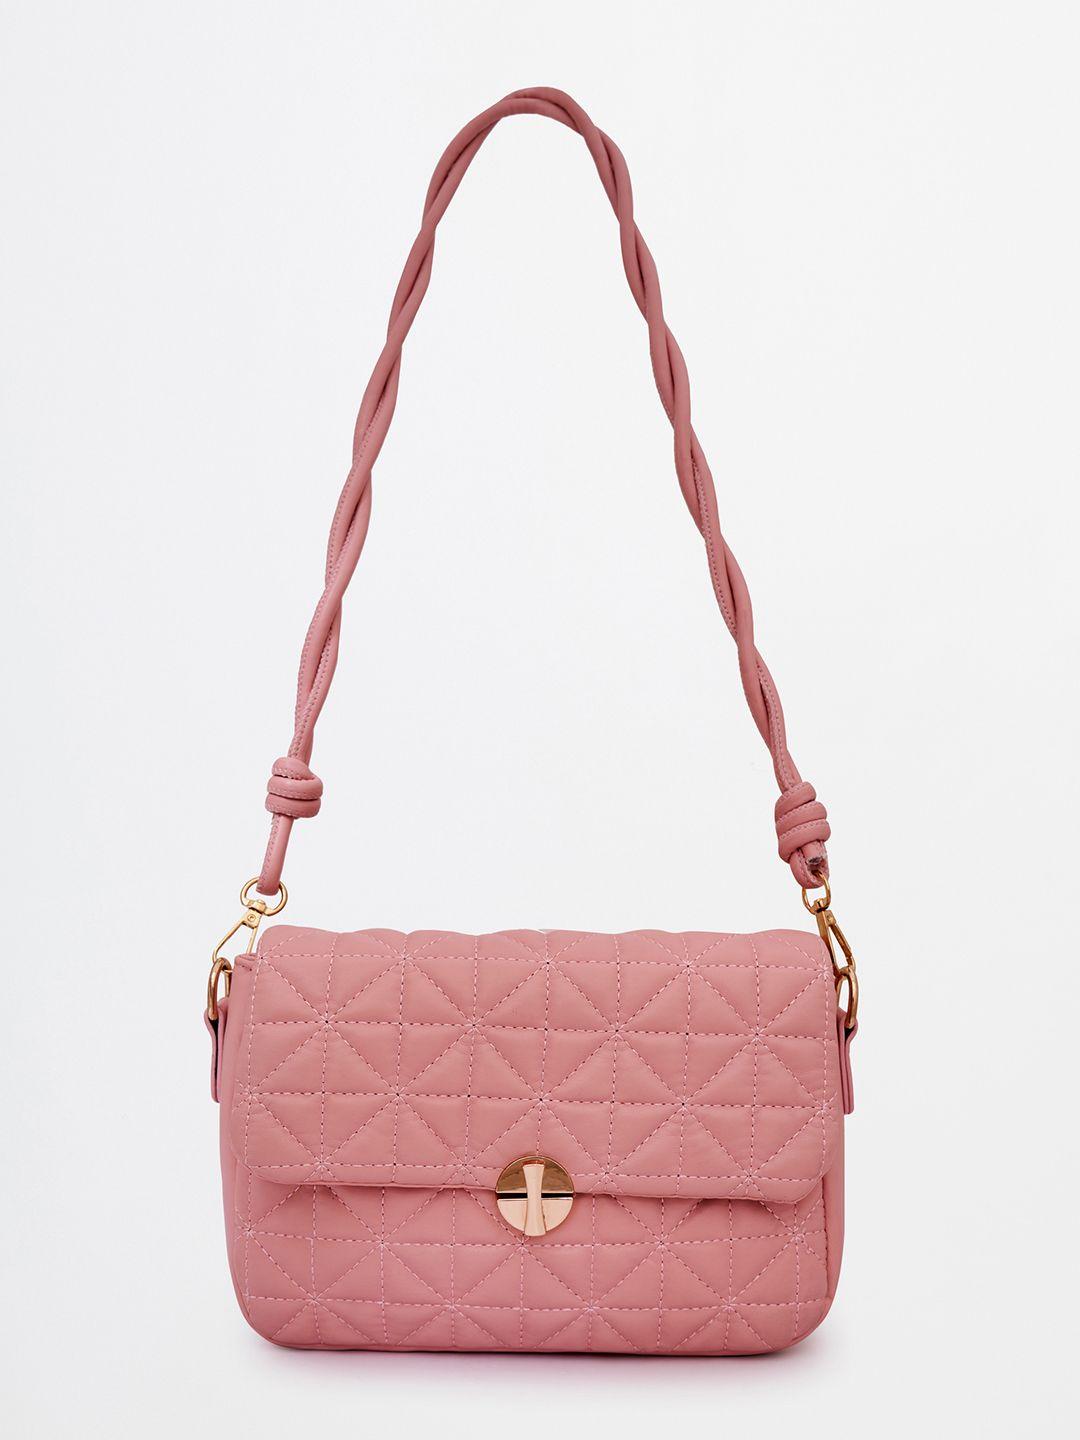 global desi pink textured structured sling bag with quilted